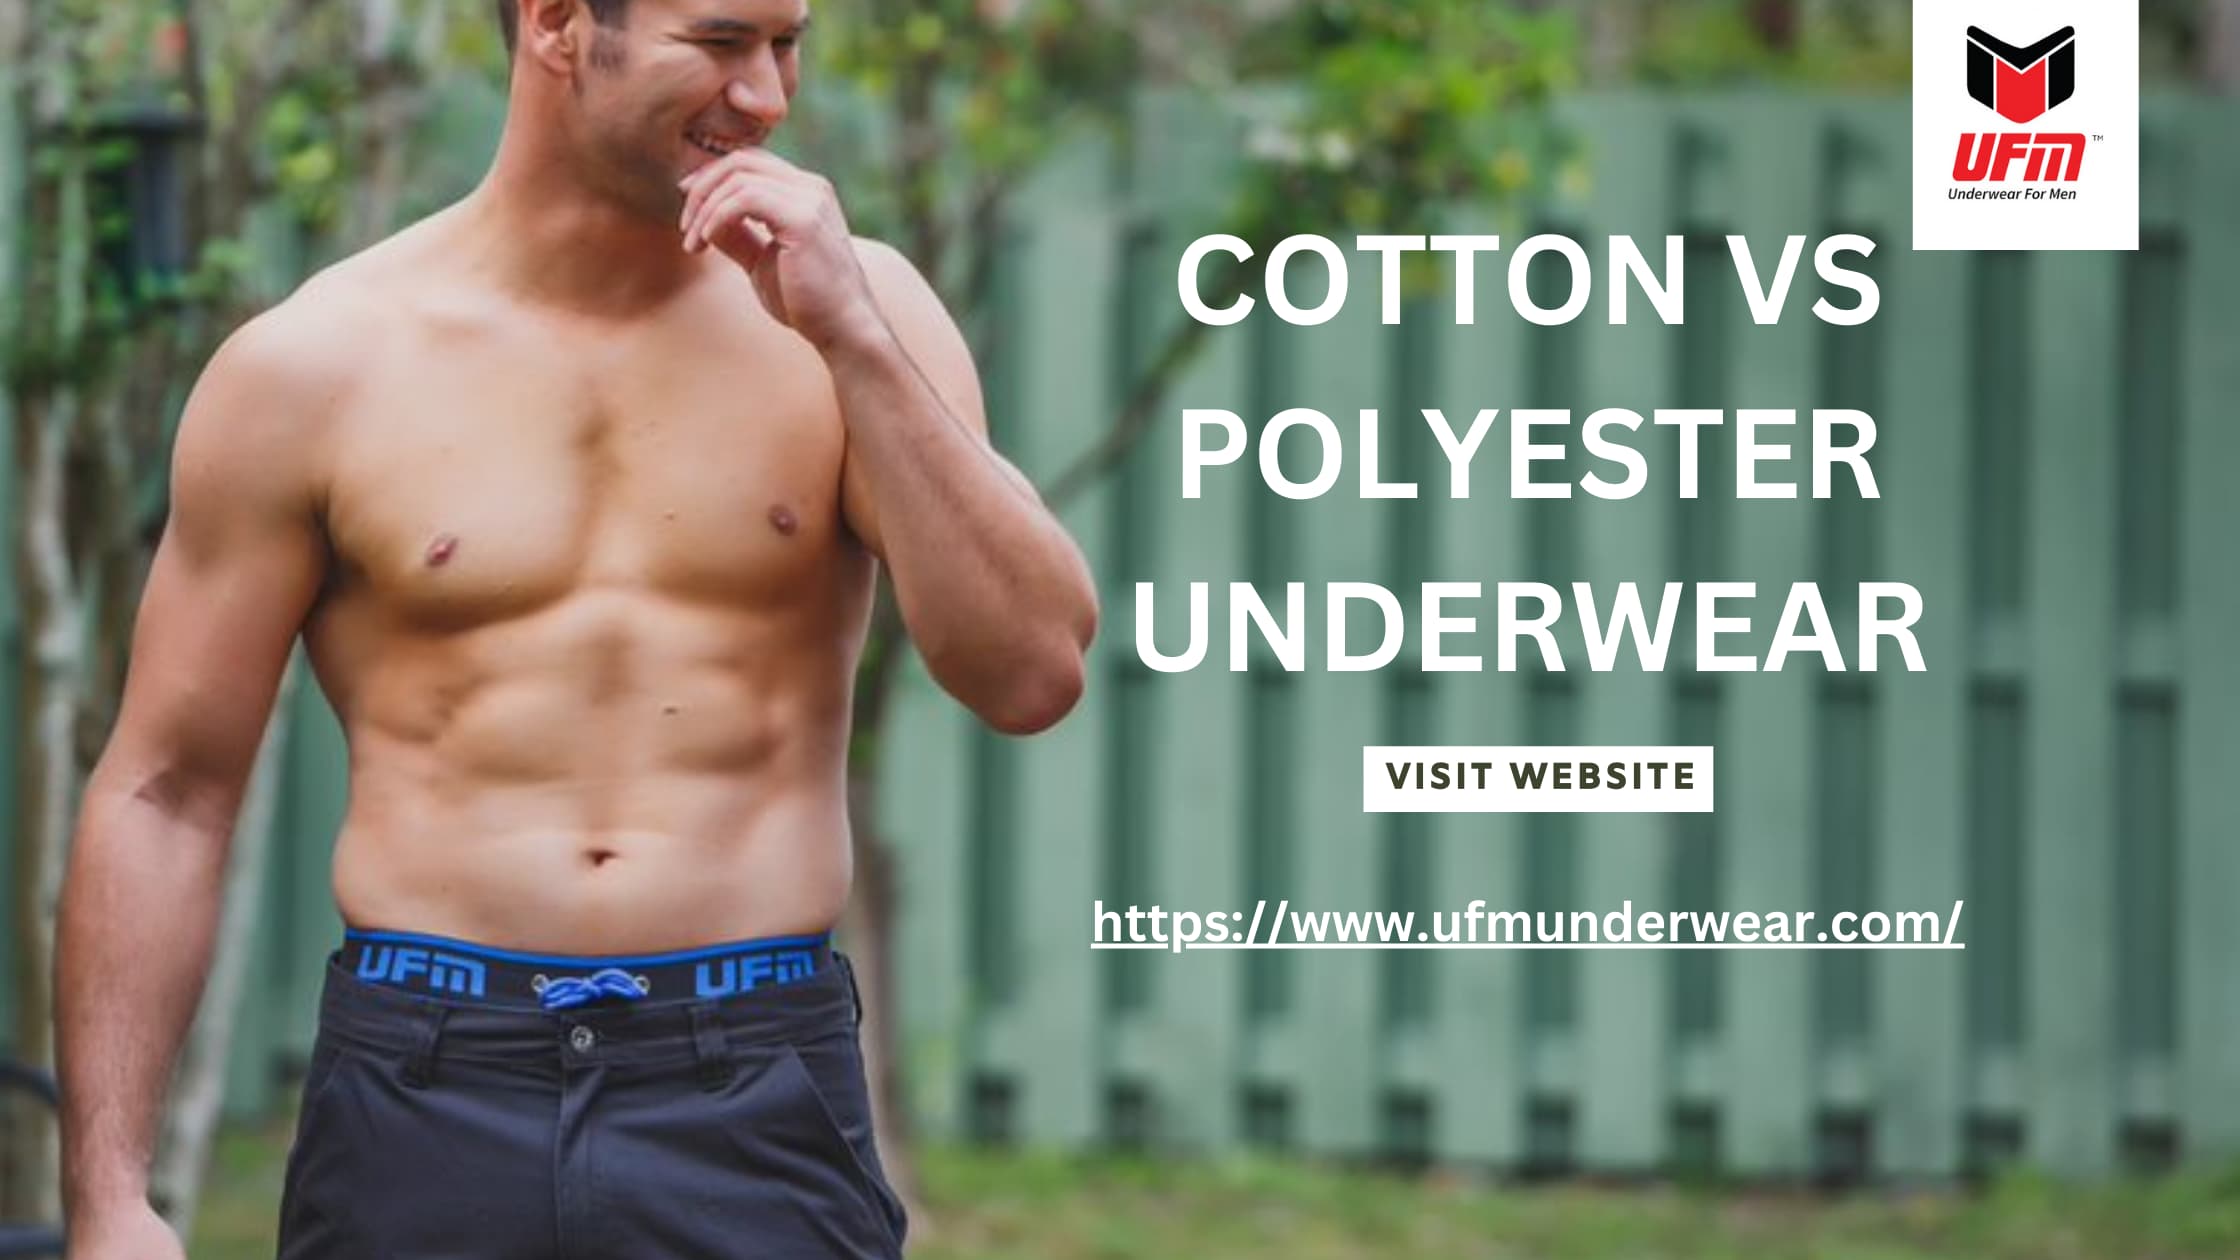 Functional underwear for men: warm and breathable